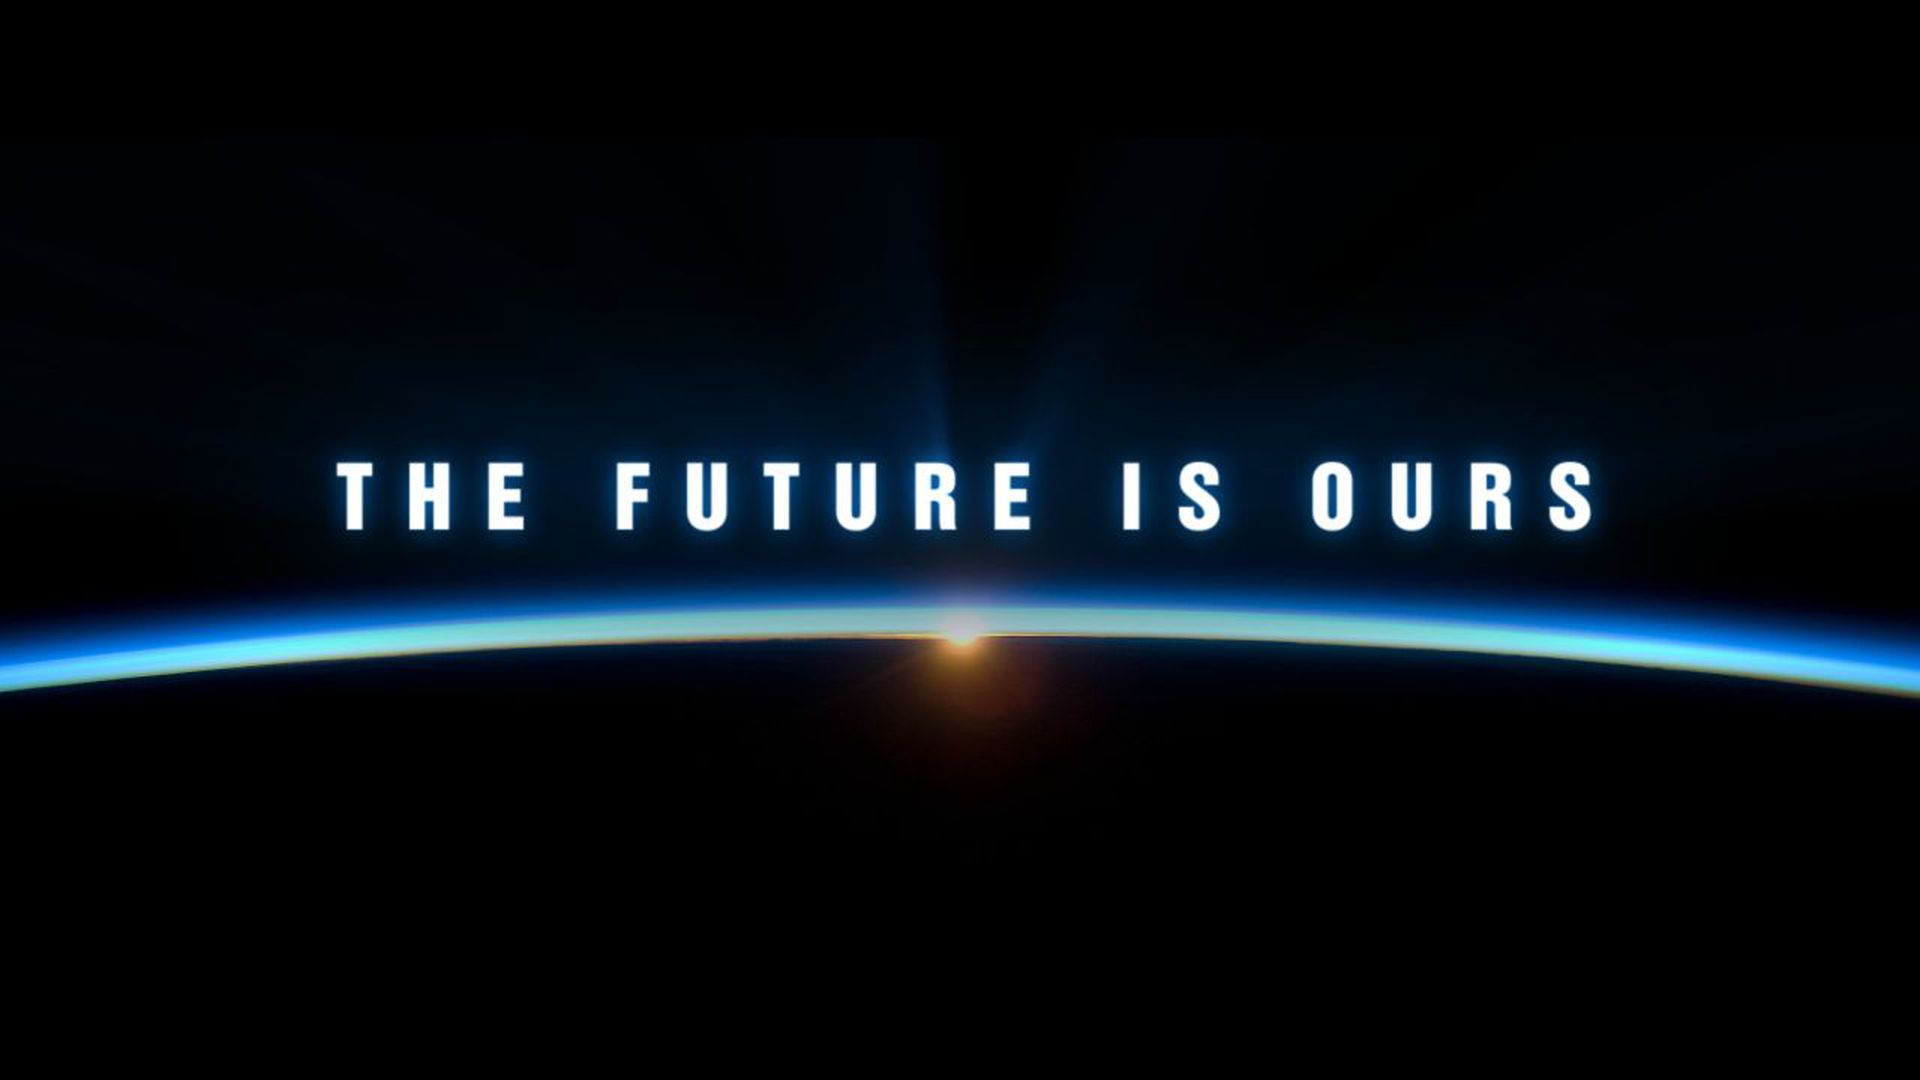 This is your future. Future надпись. The Future is near. Future is here. Our Future.